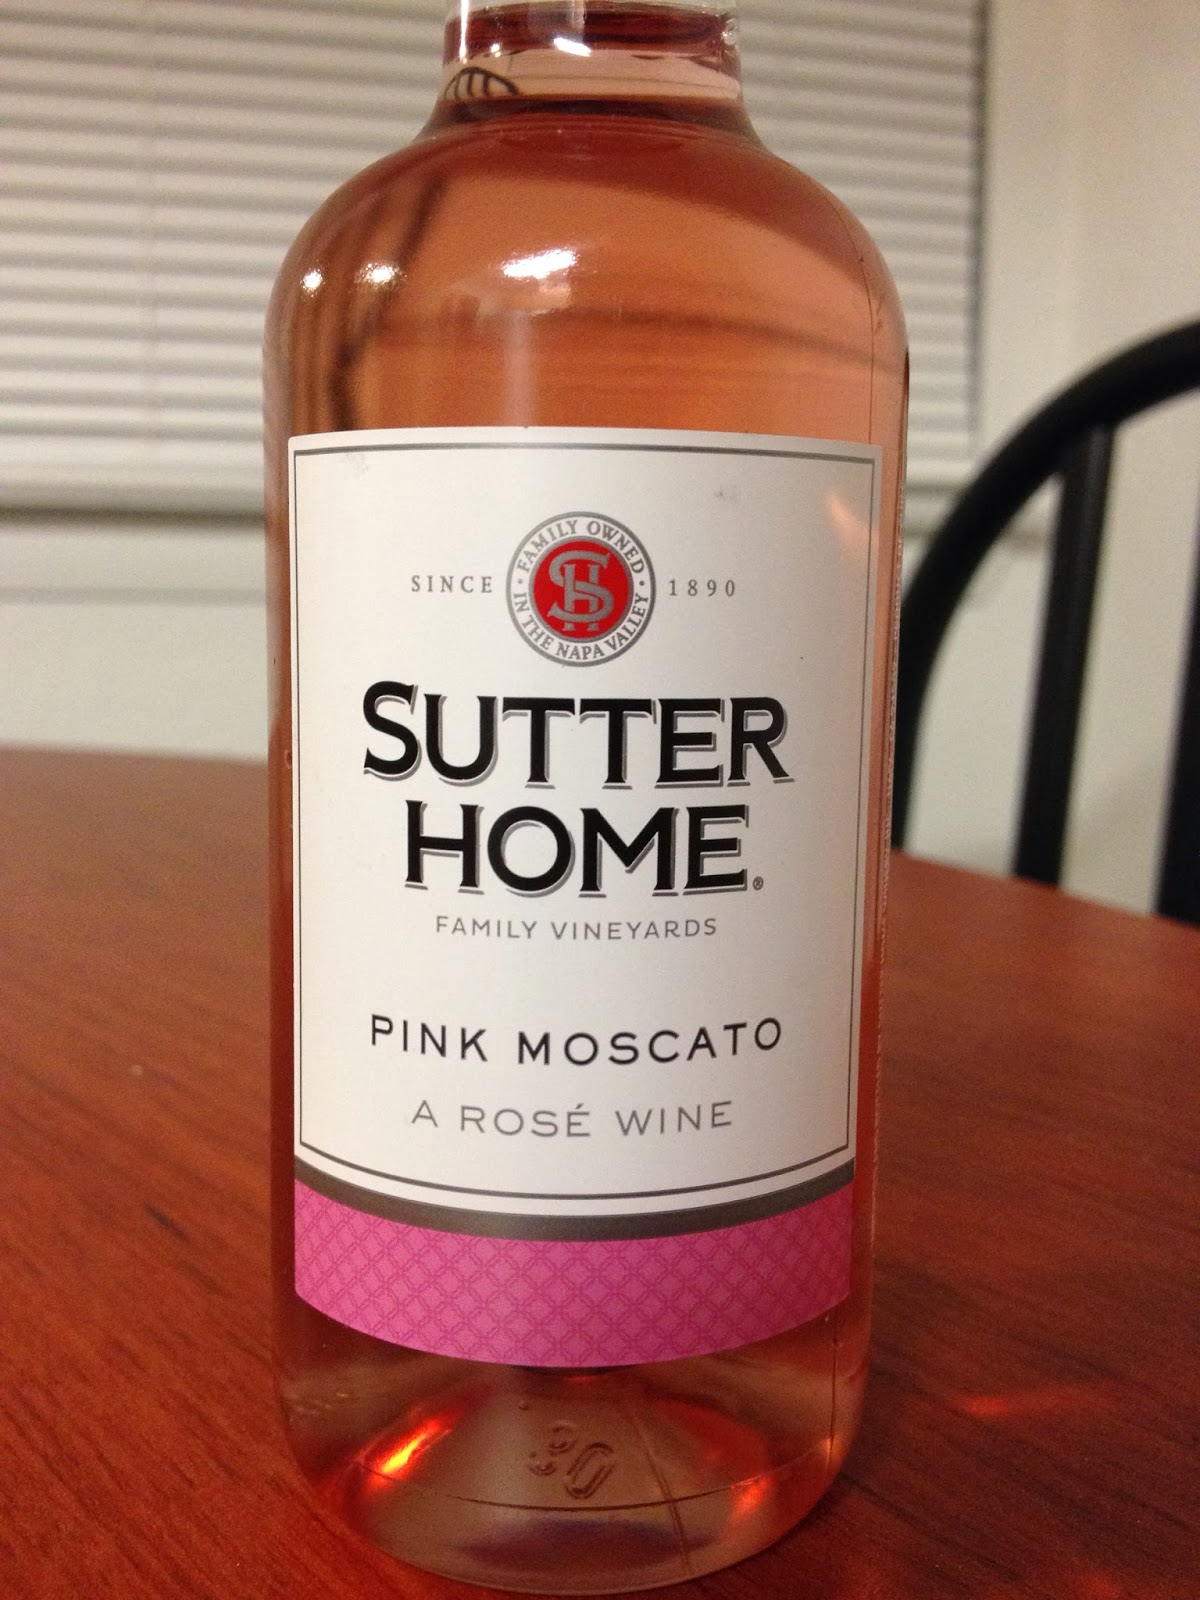 adrienne-s-wine-blog-tasting-sutter-home-pink-moscato